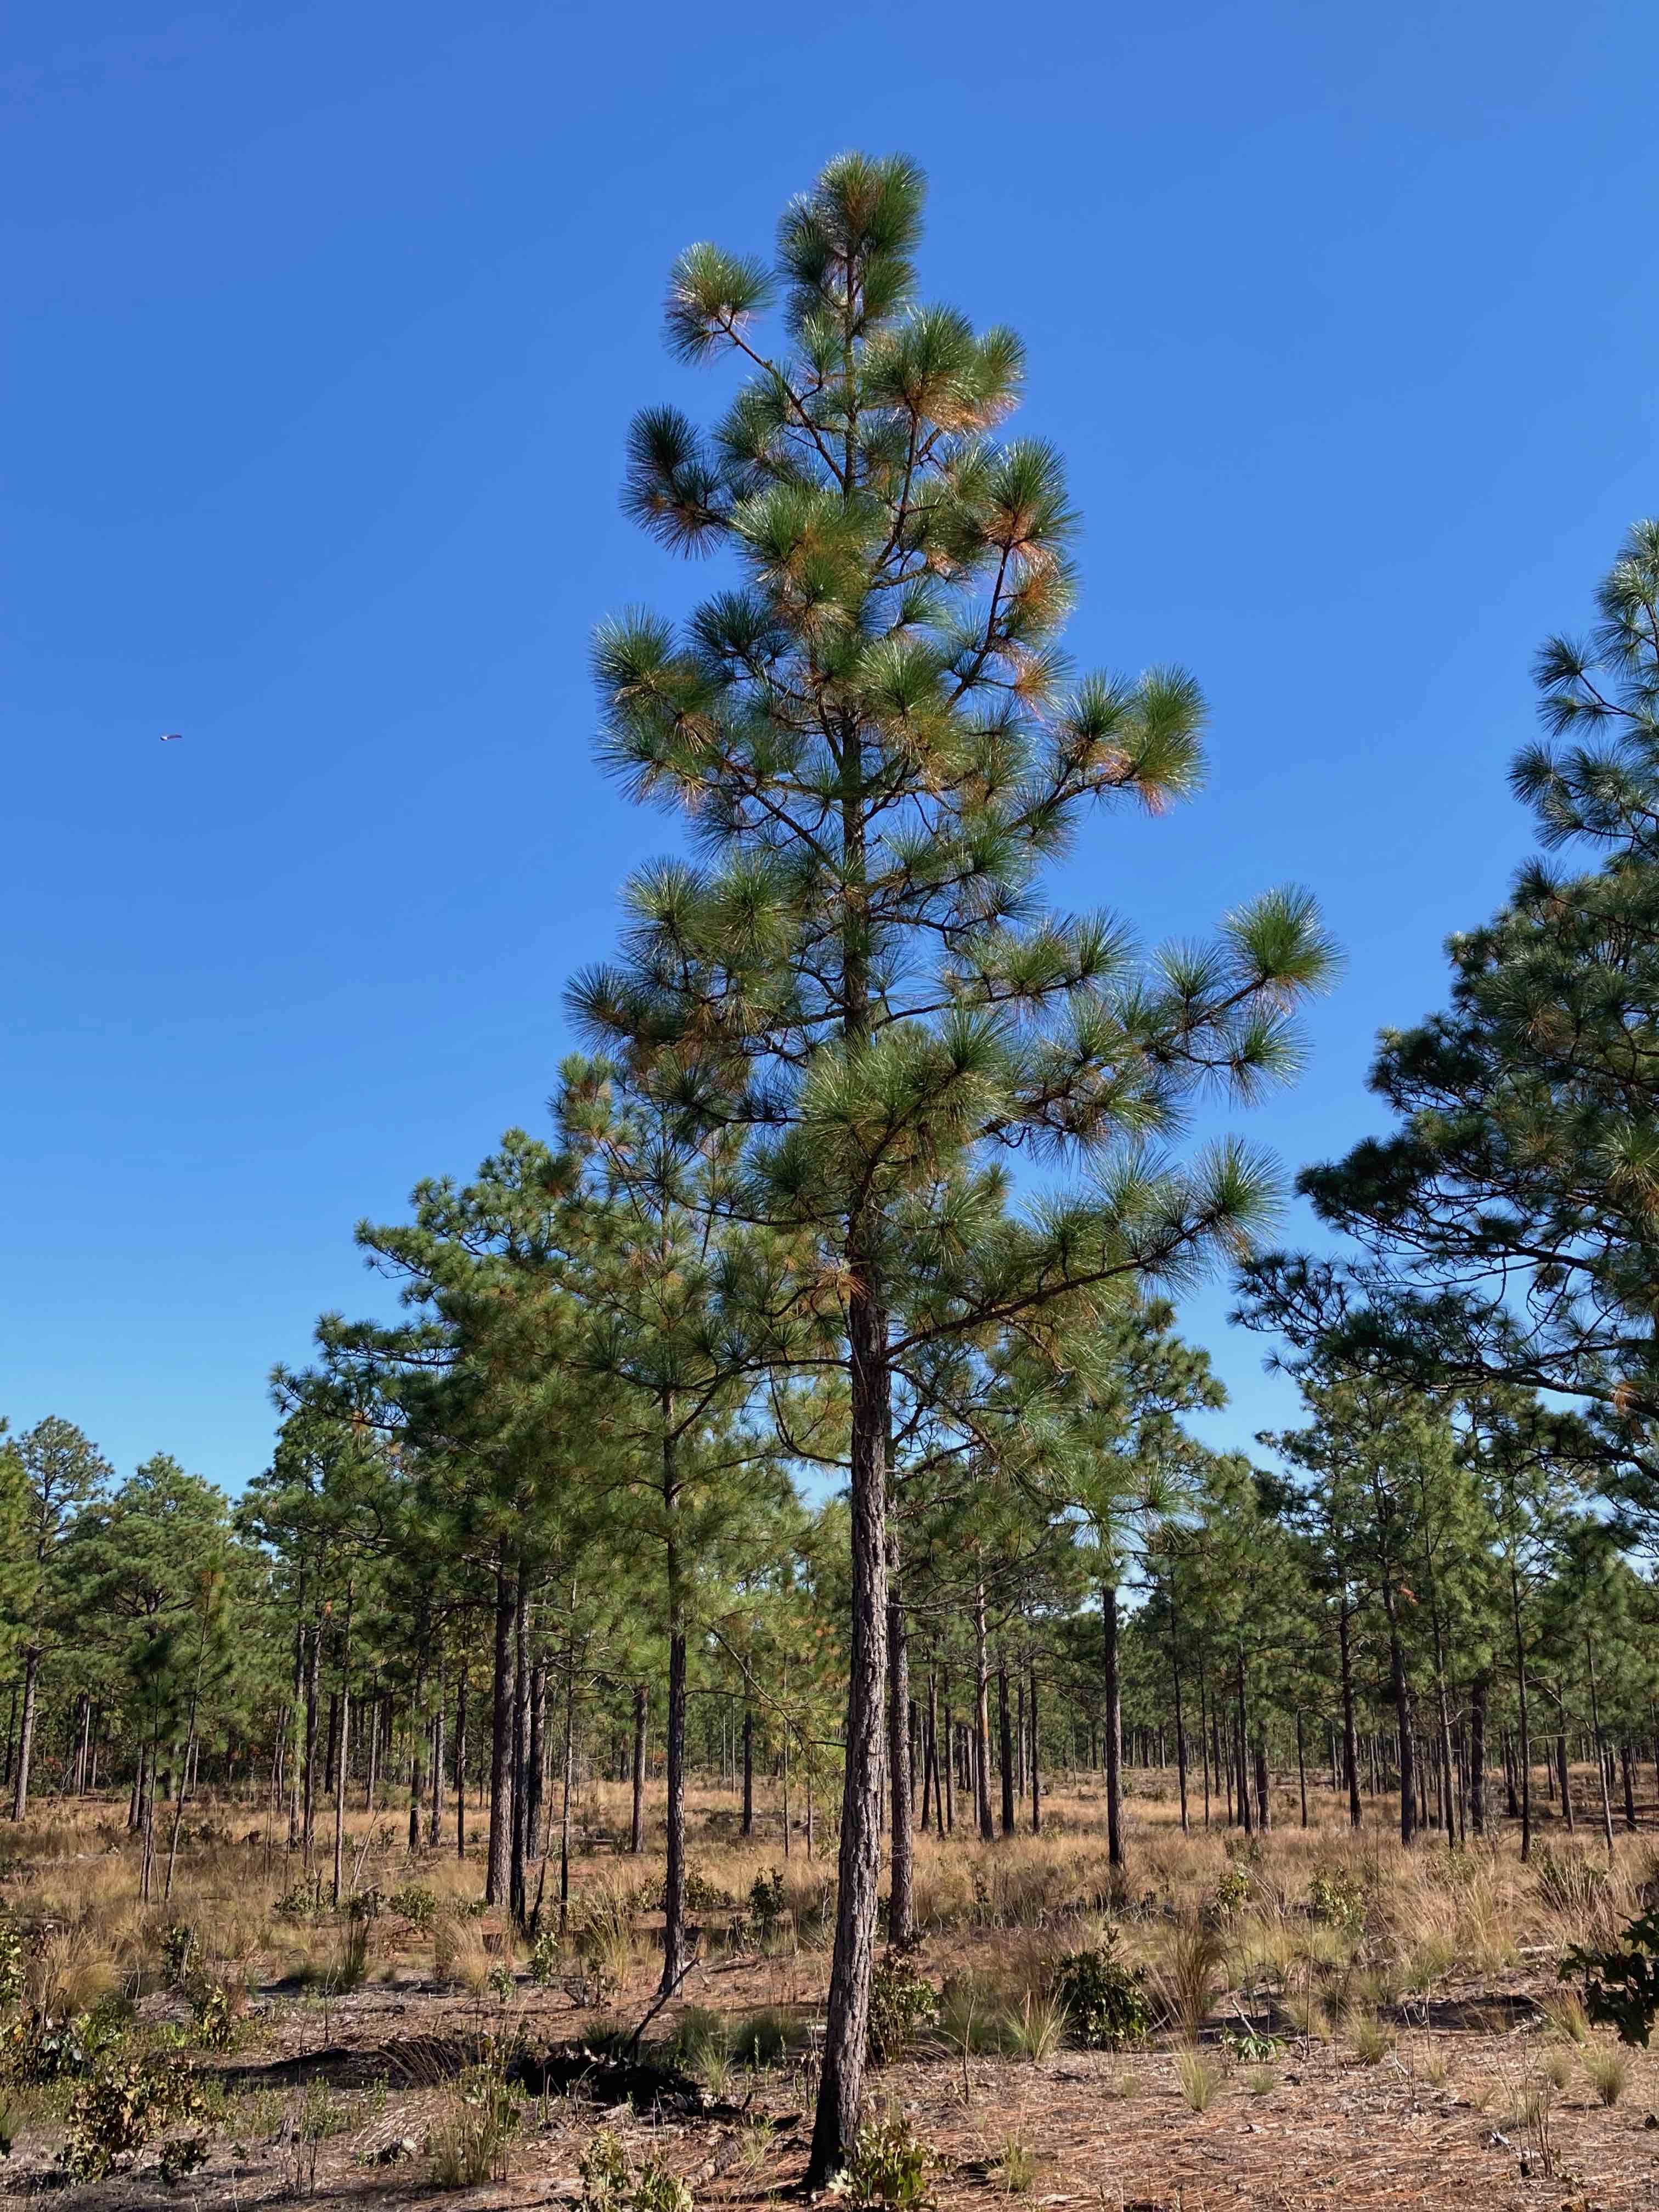 The Scientific Name is Pinus palustris. You will likely hear them called Longleaf Pine, Southern Pine. This picture shows the Has the longest needles of any of our pines. of Pinus palustris